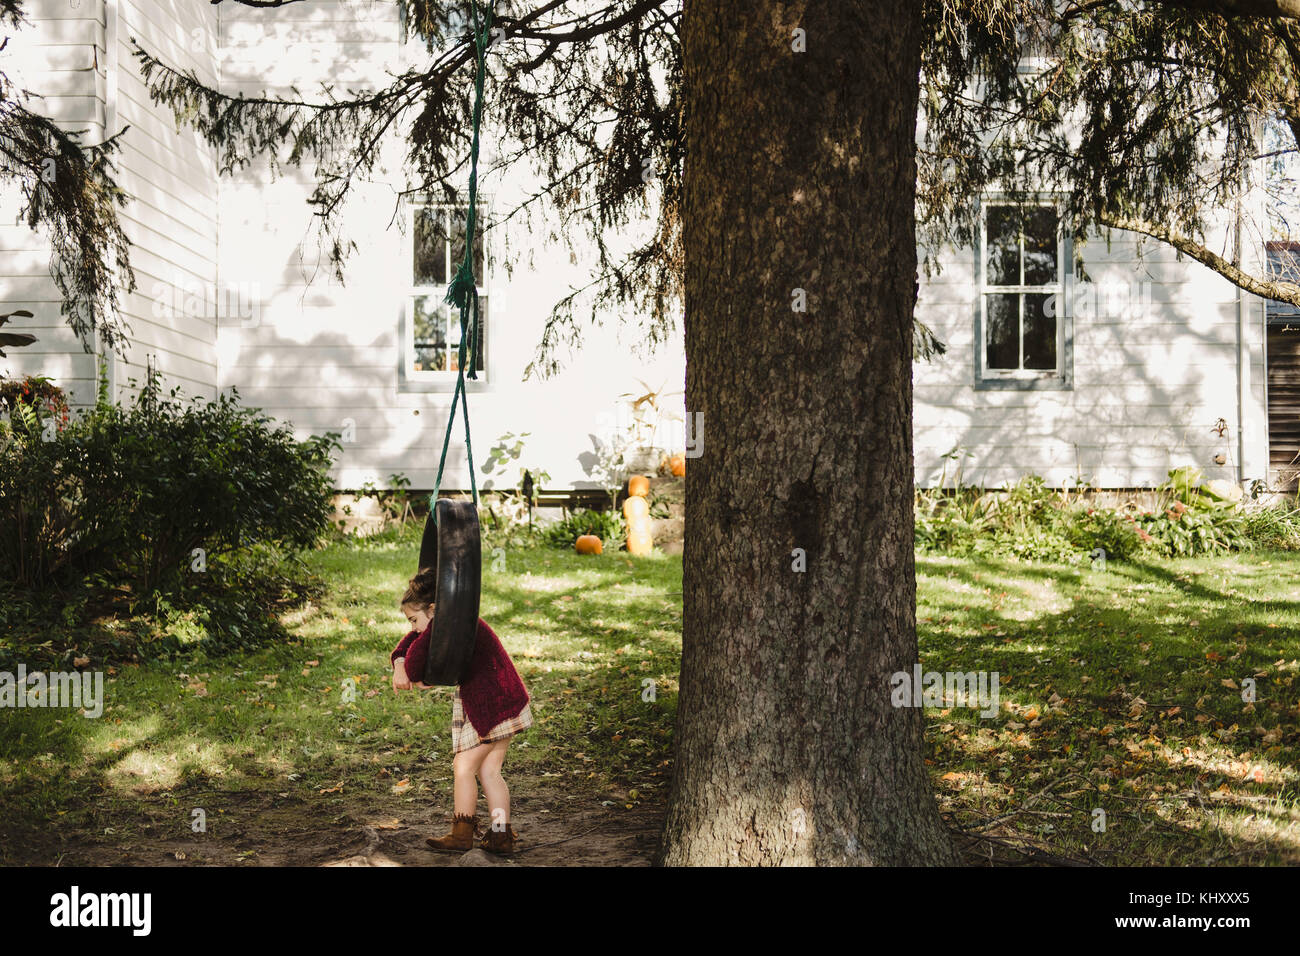 Girl on tyre swing hanging from tree Stock Photo